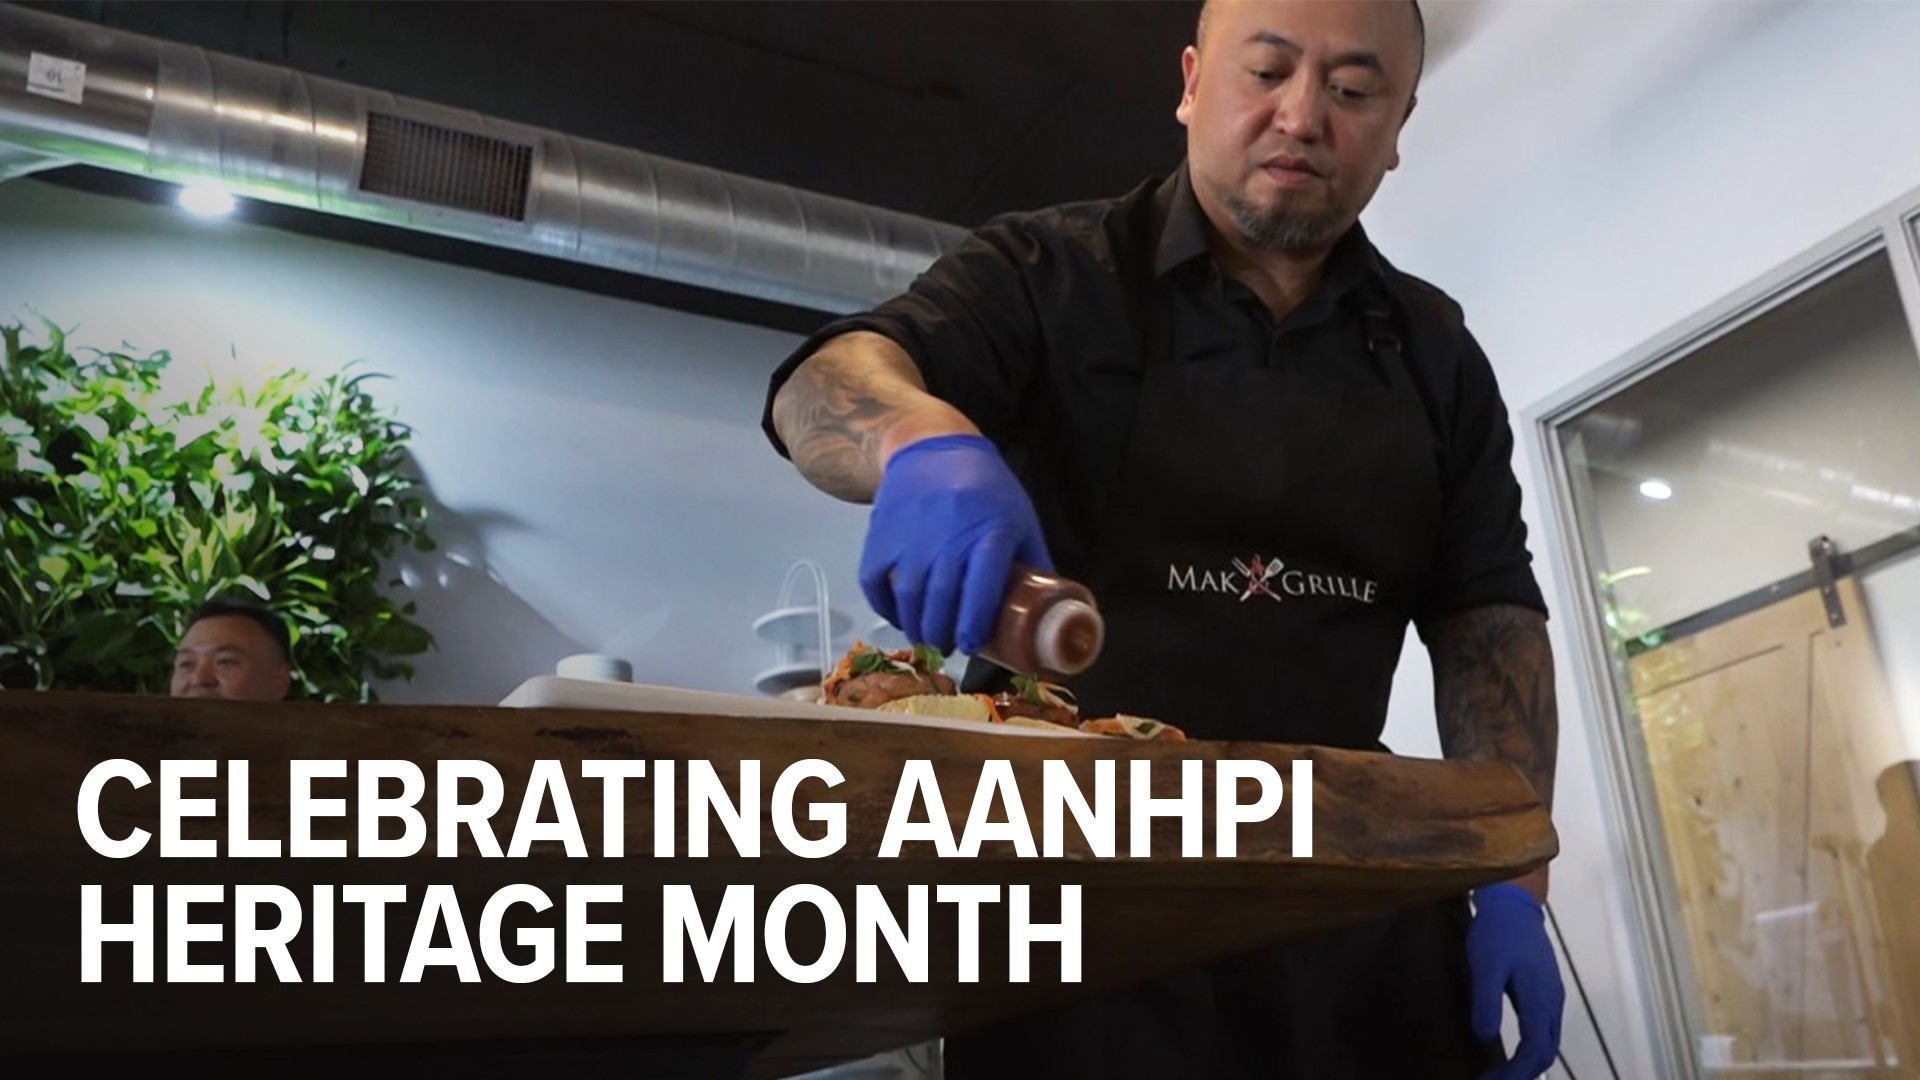 A celebration of AAPI heritage month, local Sacramento small businesses and restaurants are coming together to provide food for the community.